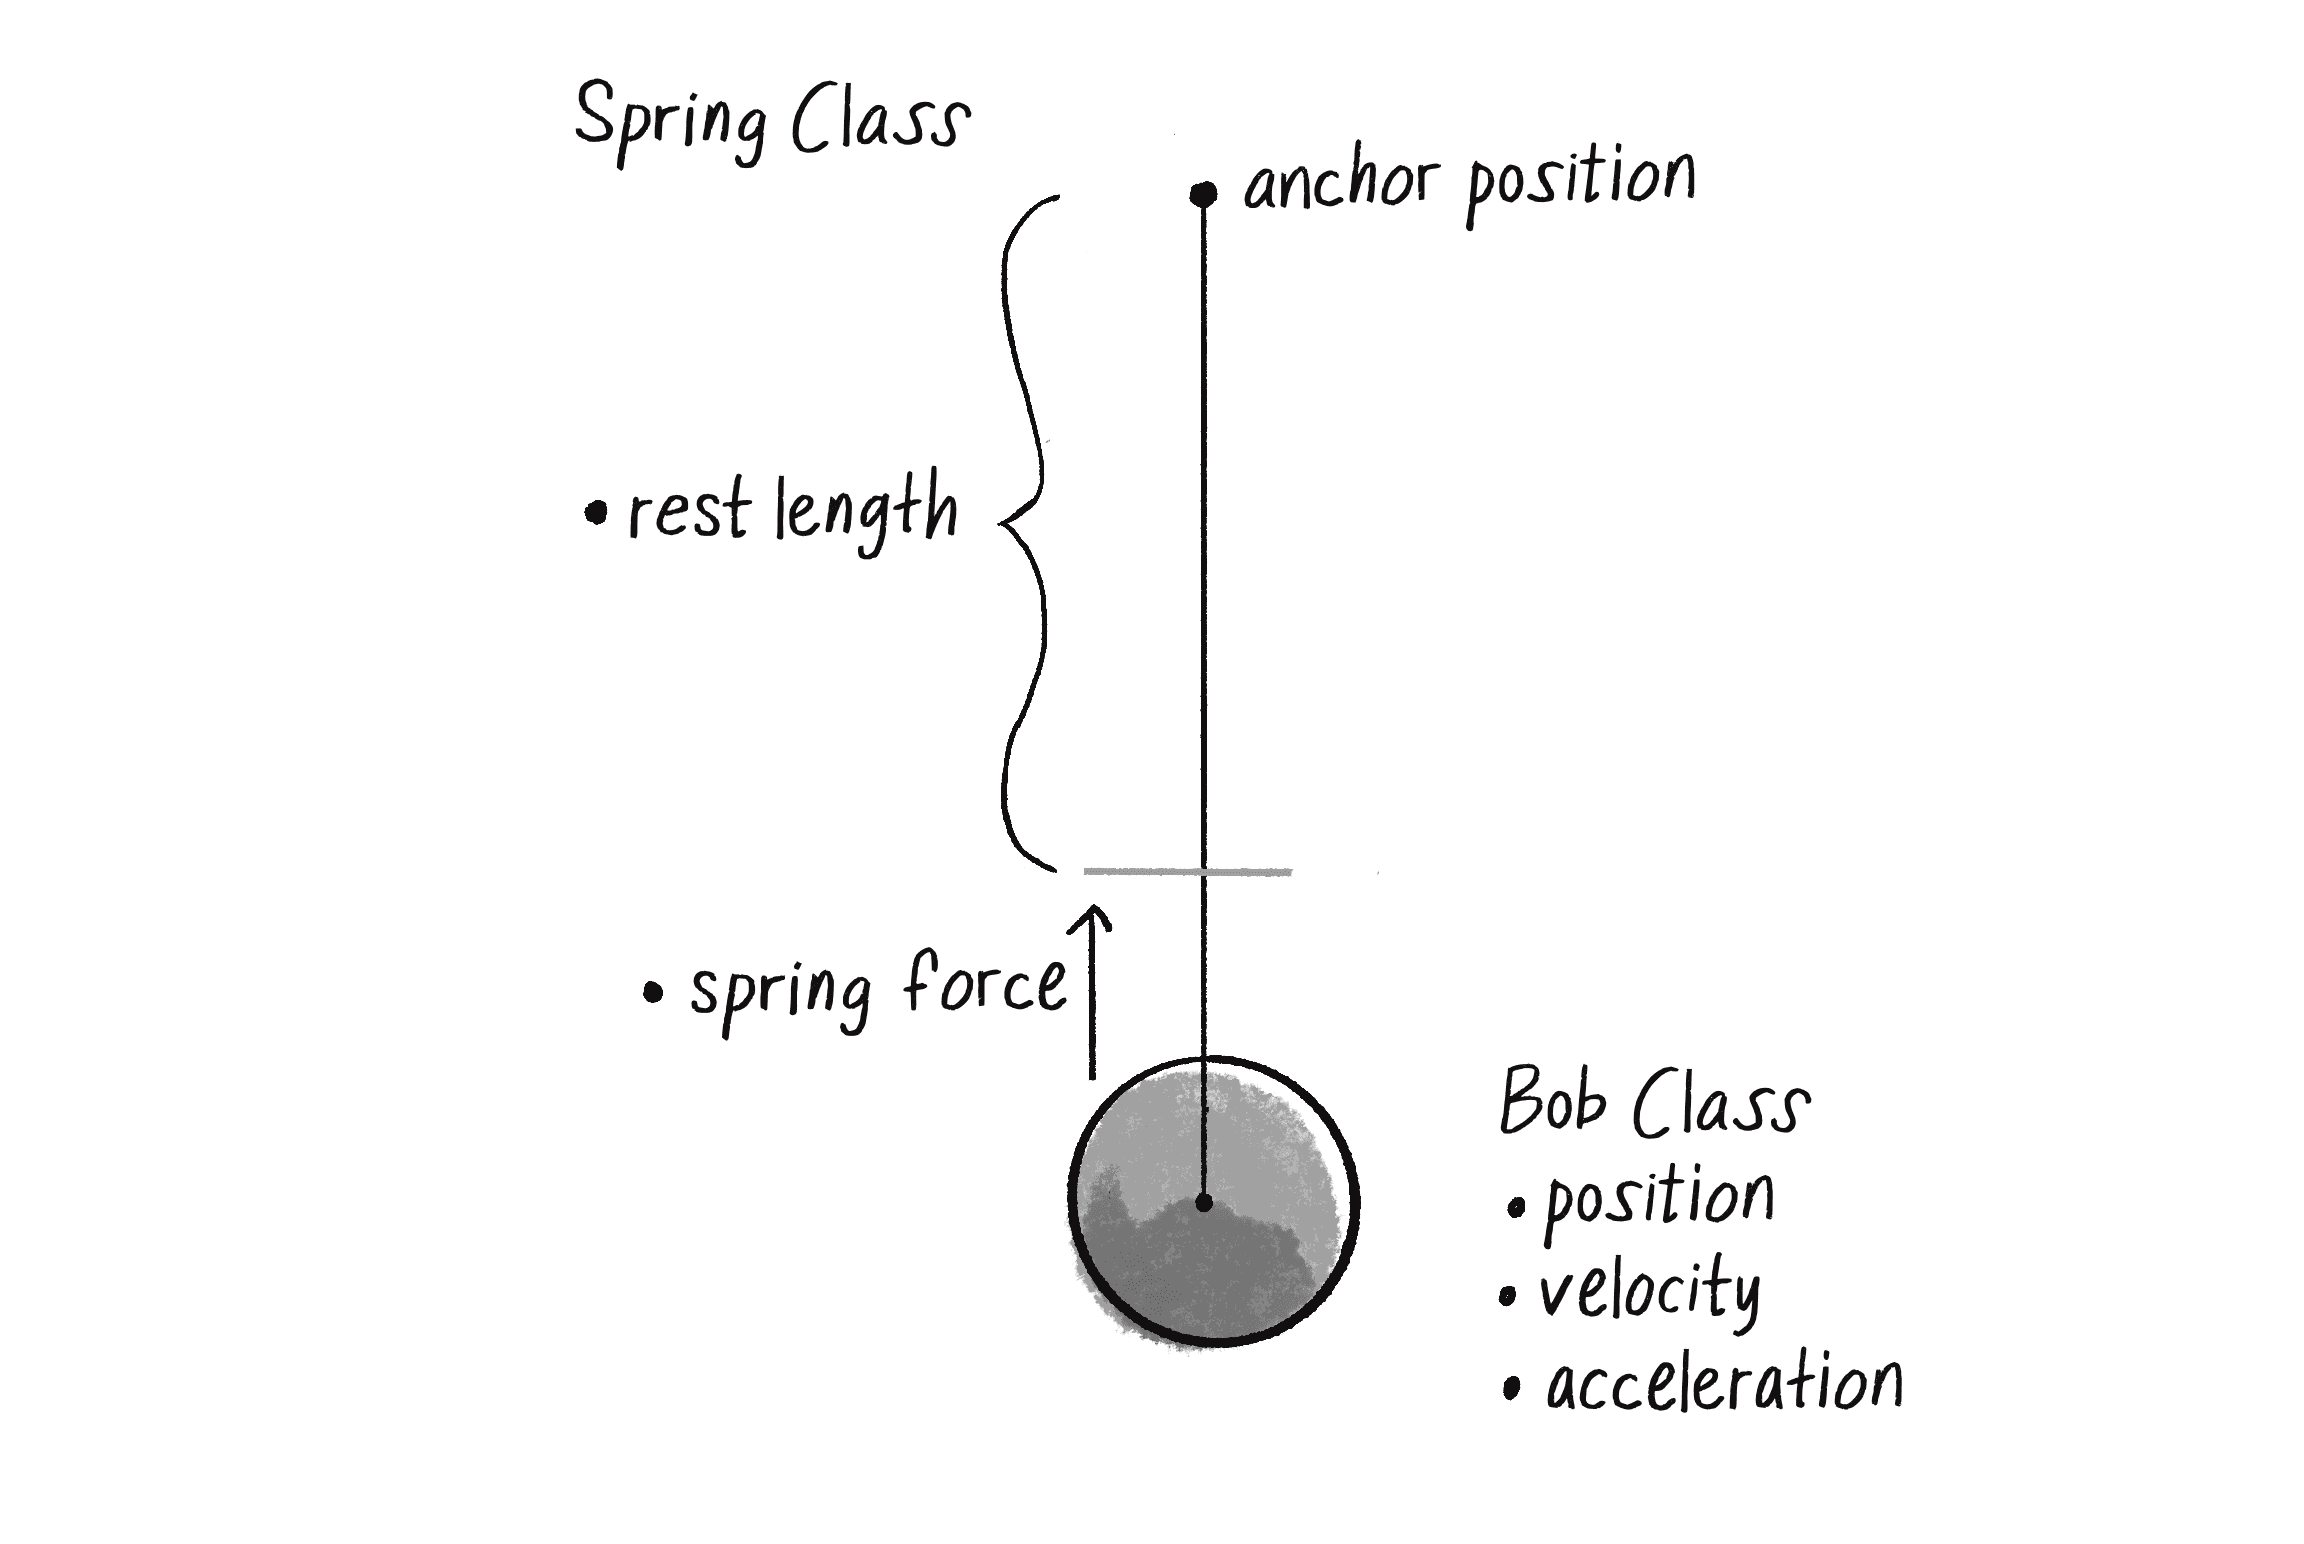 Figure 3.14: The Spring class has anchor and rest length; the Bob class has position, velocity, and acceleration.